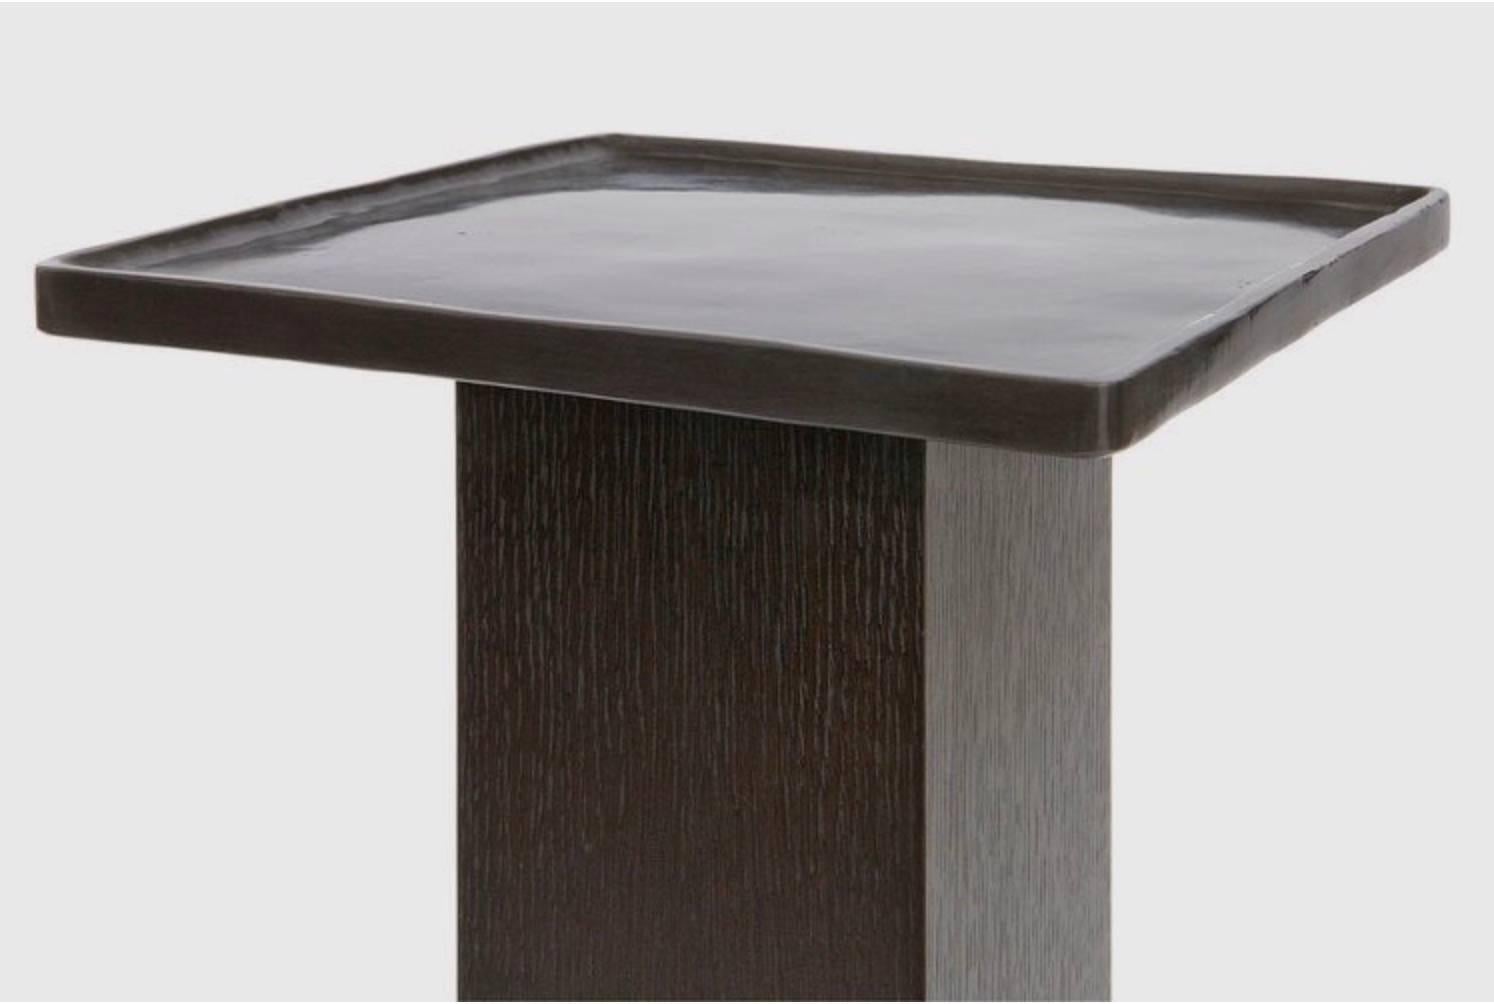 The sturdy rift-sawn oak pedestal supports a functional cast-bronze tray finished with an antiqued patina in this stylish yet sensible accent table. Use it in a living room to display decorative items such as sculptures or busts and plant-filled